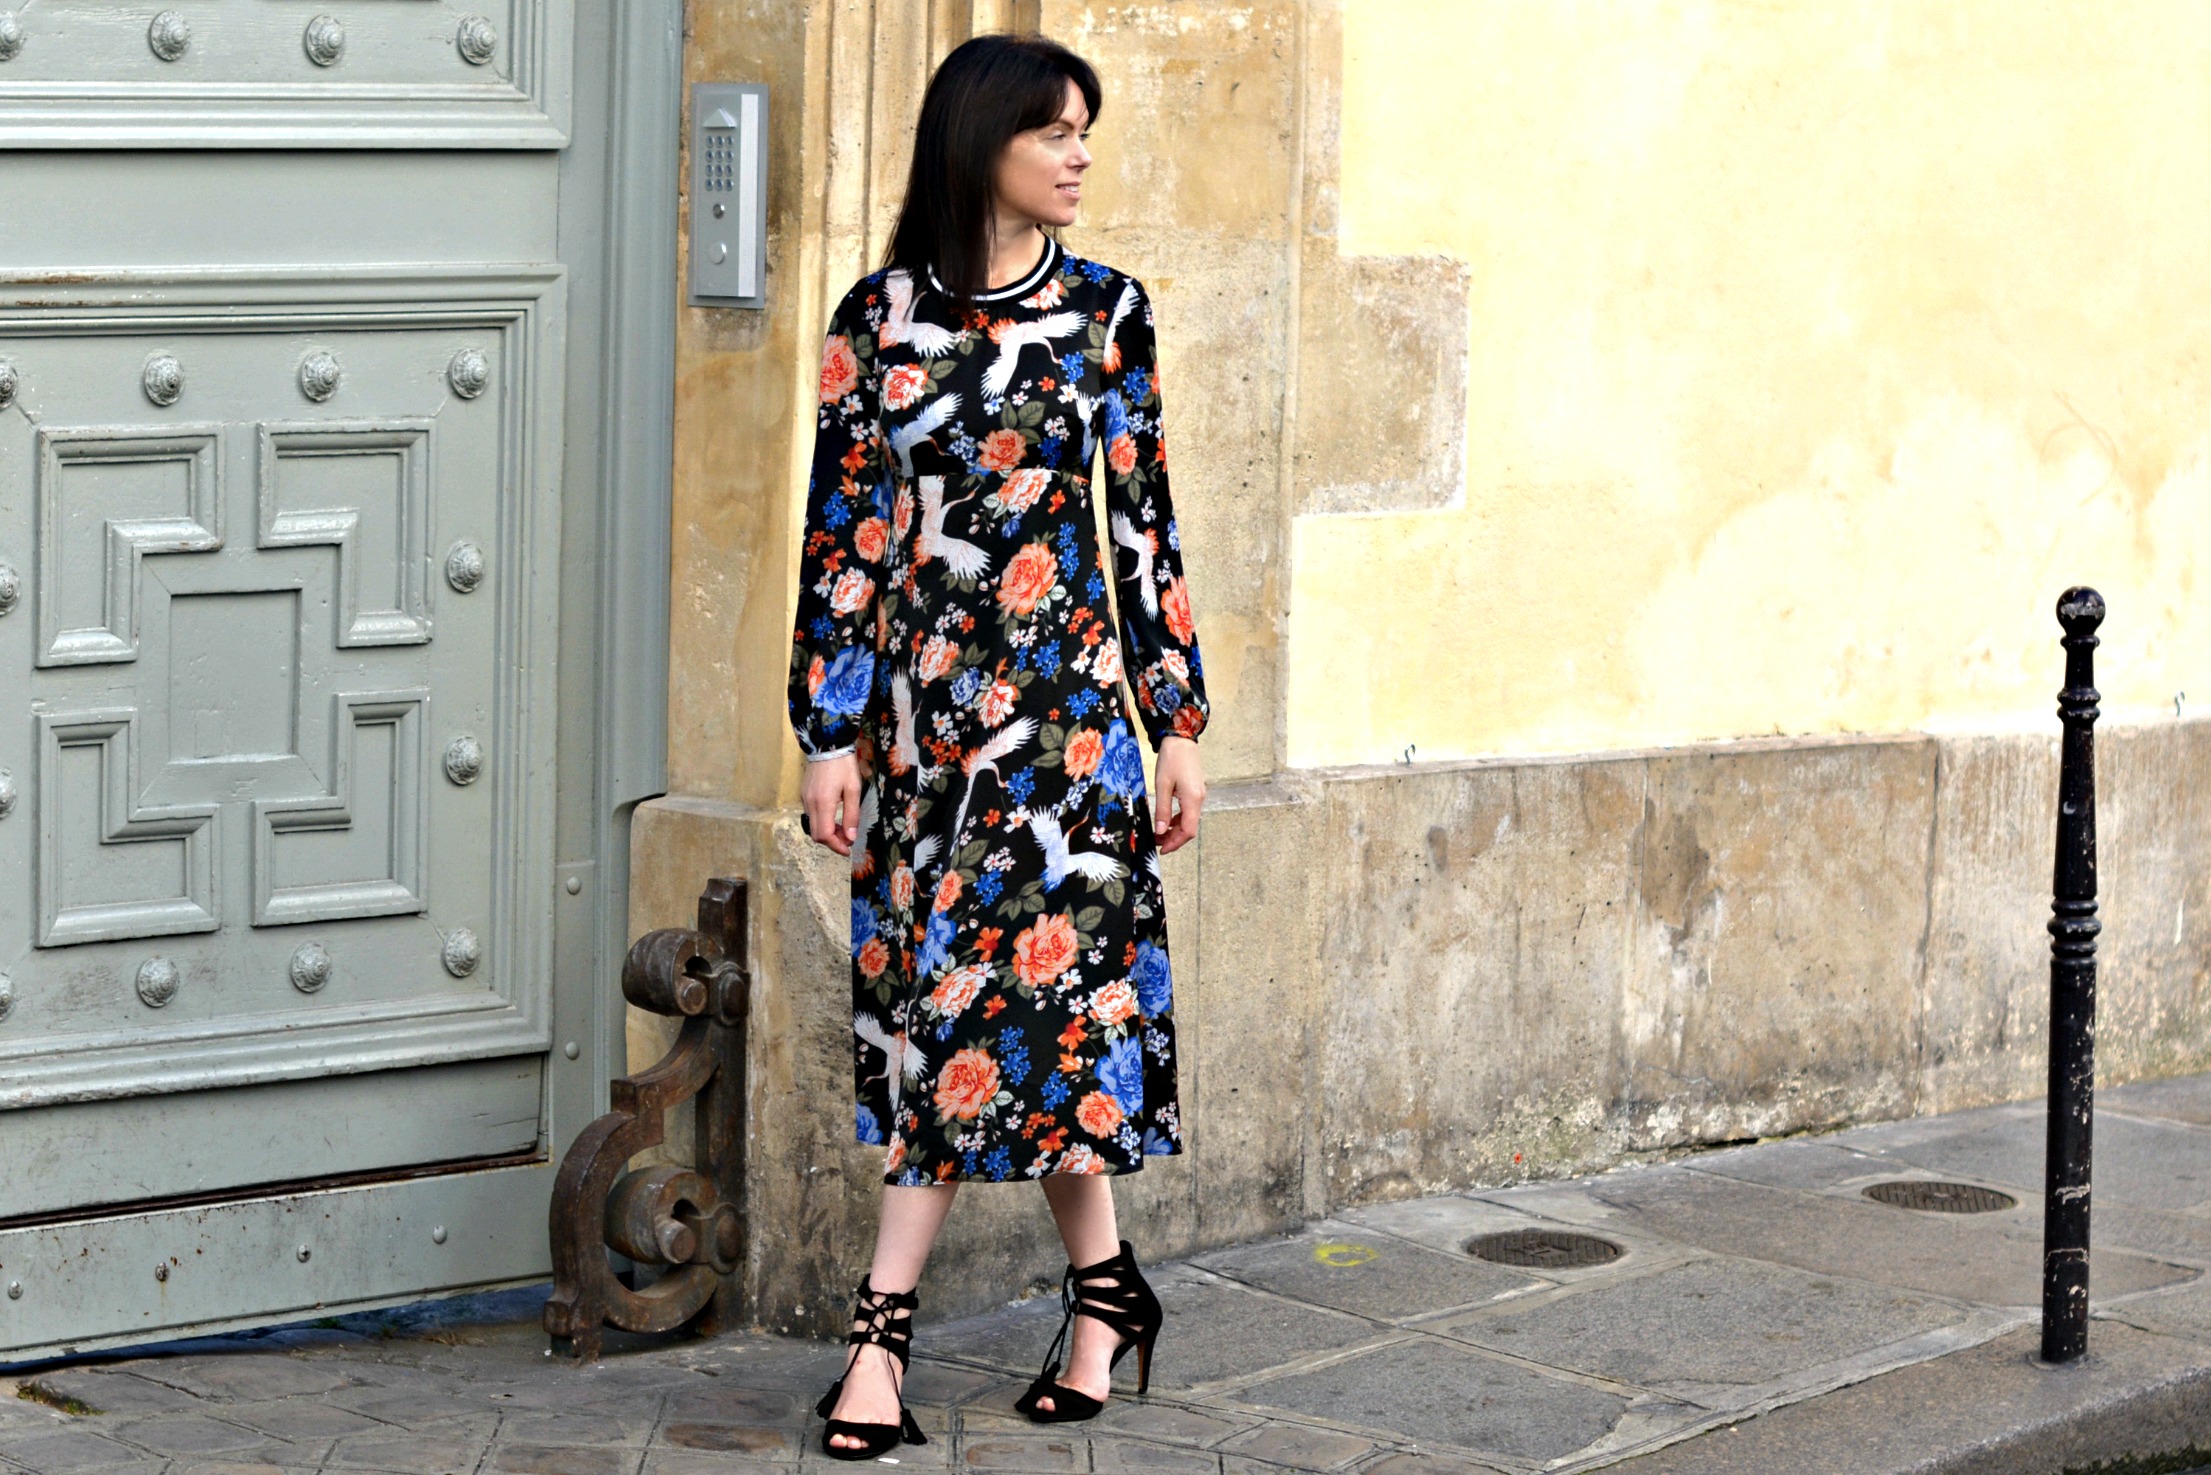 A long sleeved floral midi dress is perfect for going from day to night in Paris